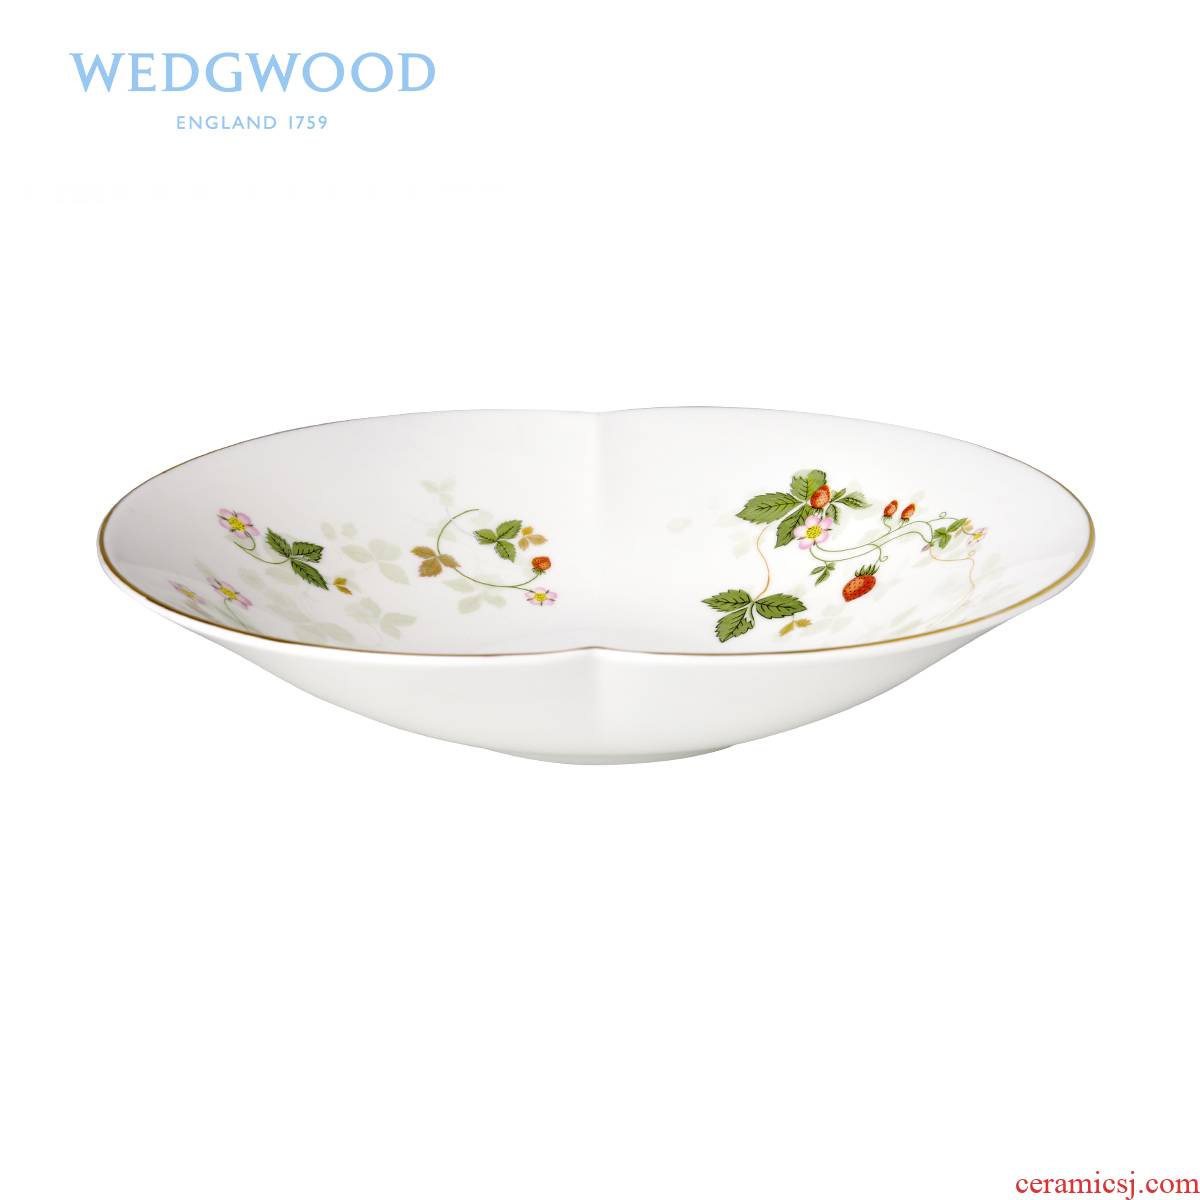 Wedgwood WildStrawberry wild strawberry type ipads China apple compote single European dishes